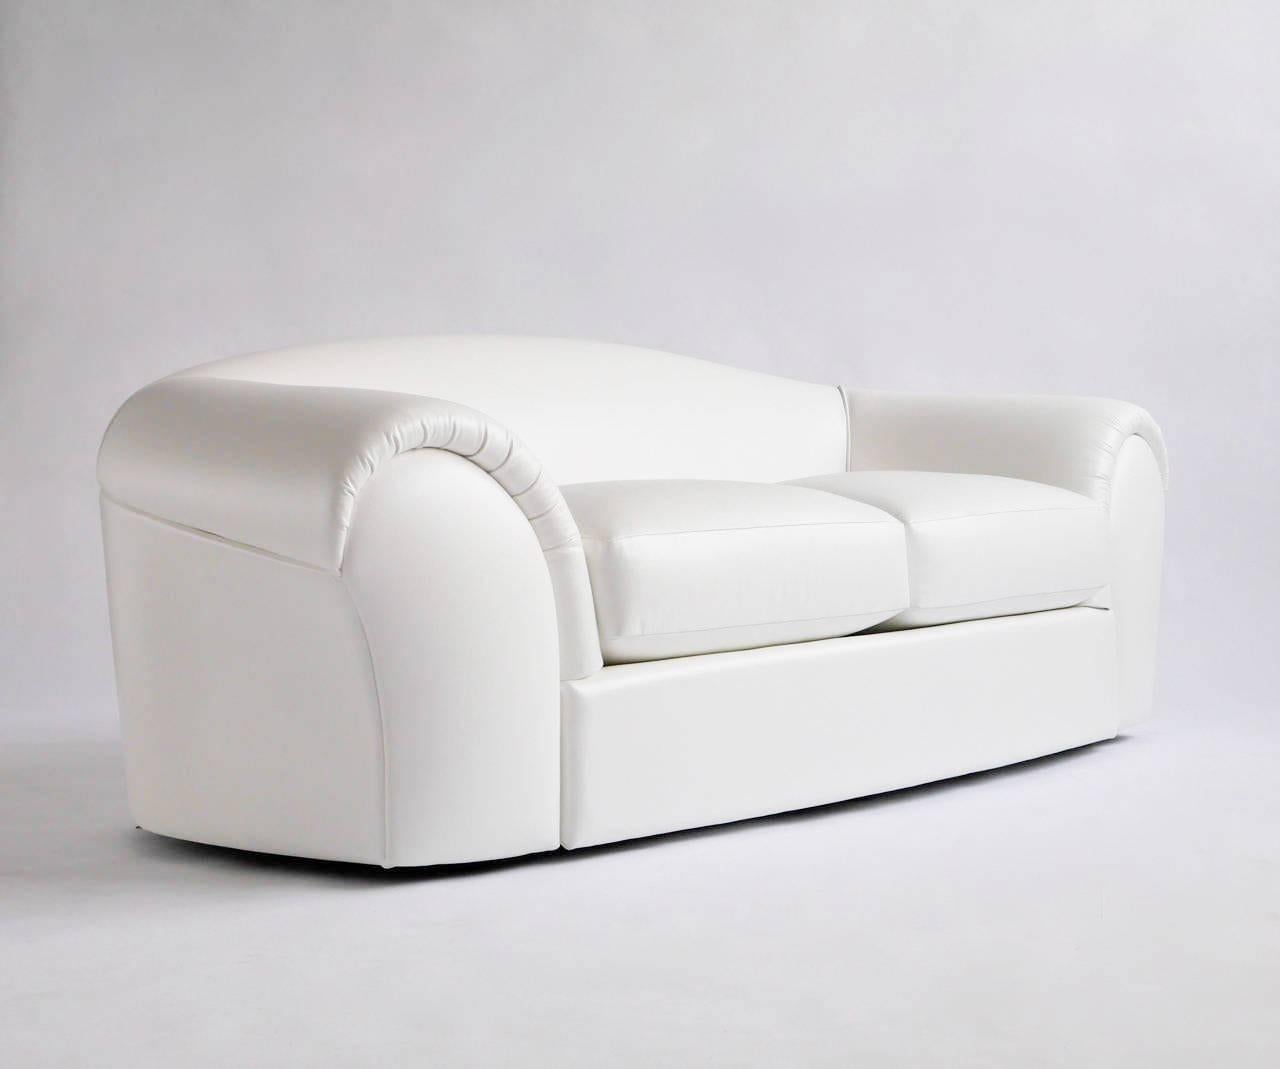 Robert Venturi sofa for Knoll recovered in Spinneybeck white leather.